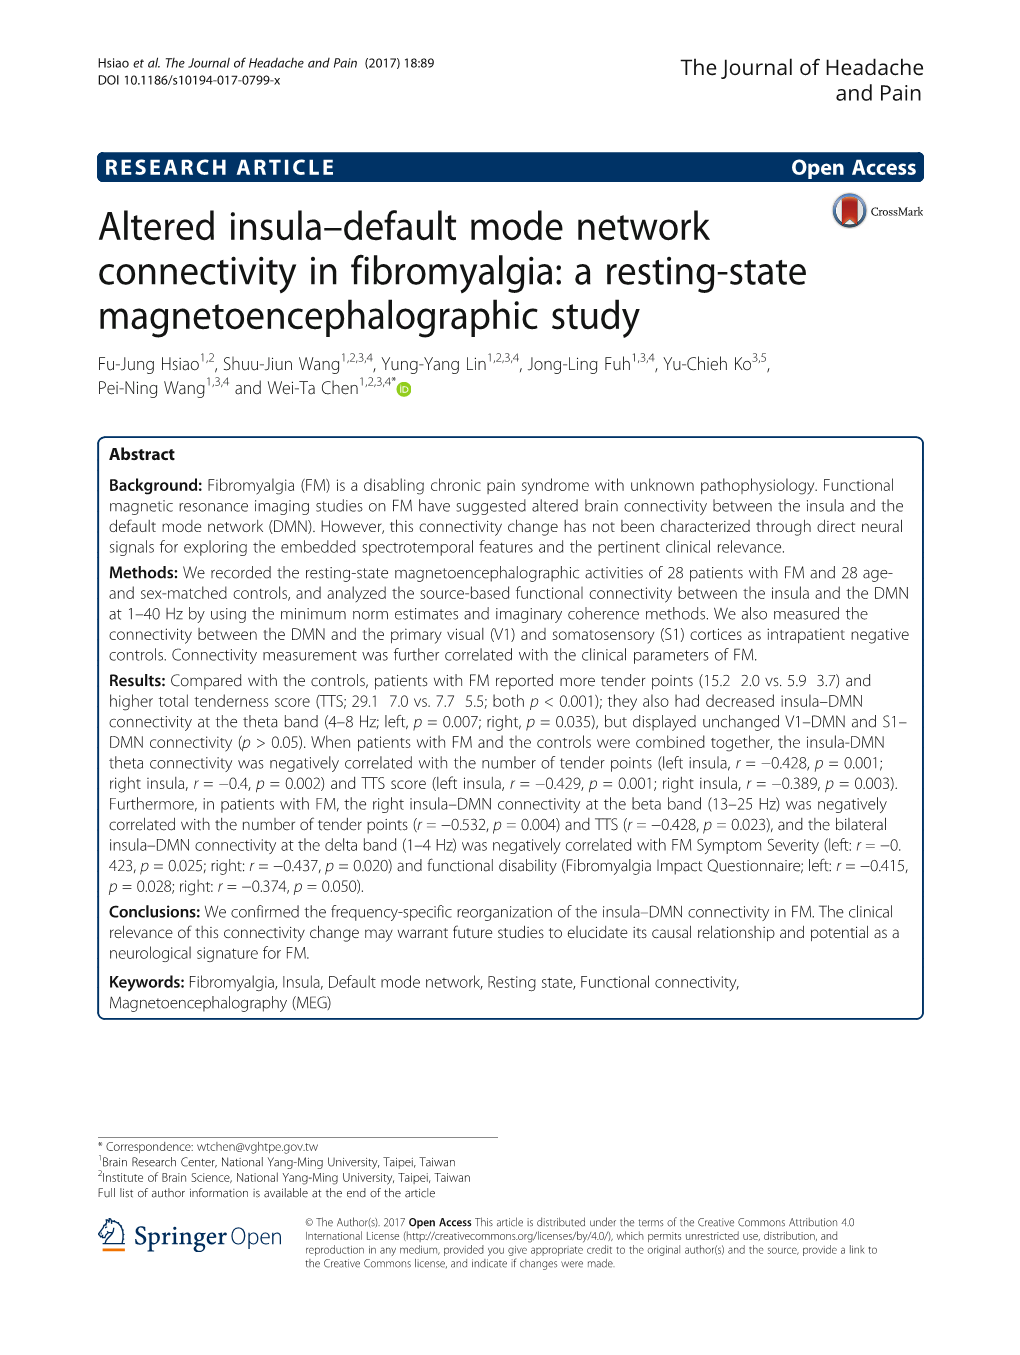 Altered Insula–Default Mode Network Connectivity in Fibromyalgia